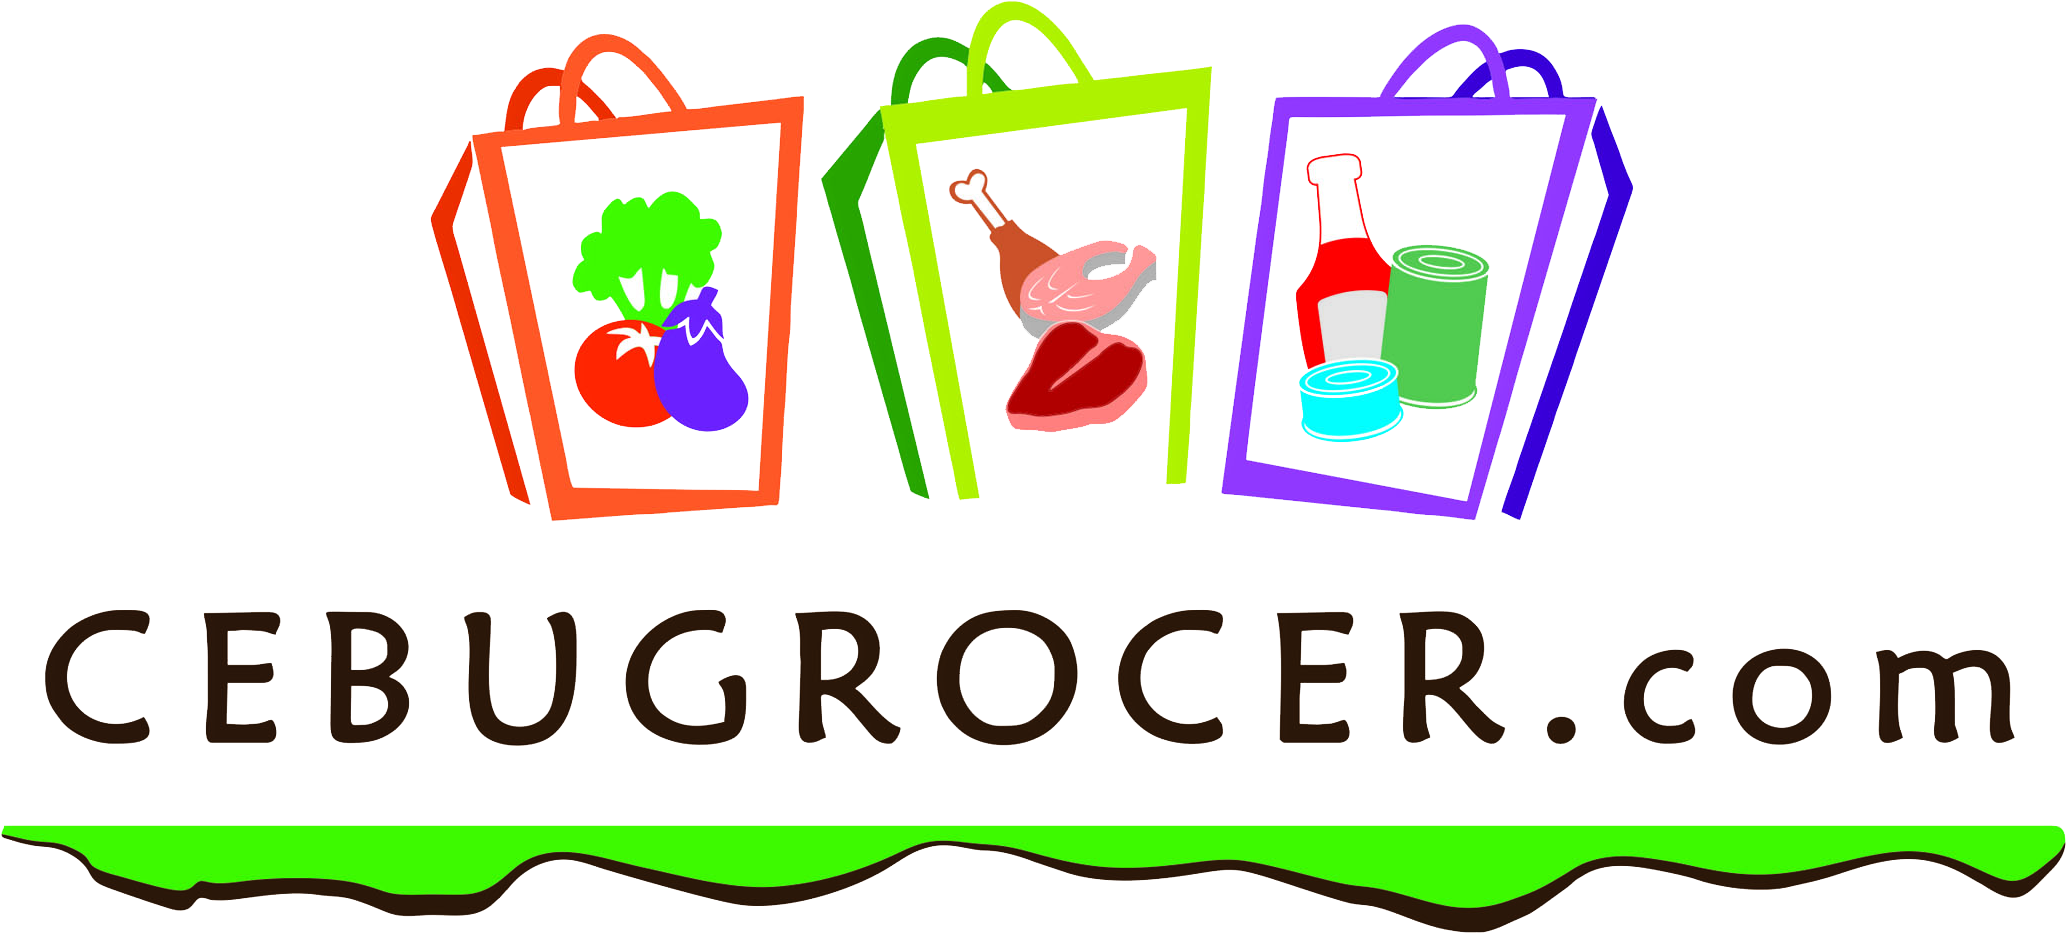 Cebugrocer Experience The Ease Of Online Grocery - Shopping (2379x1073)